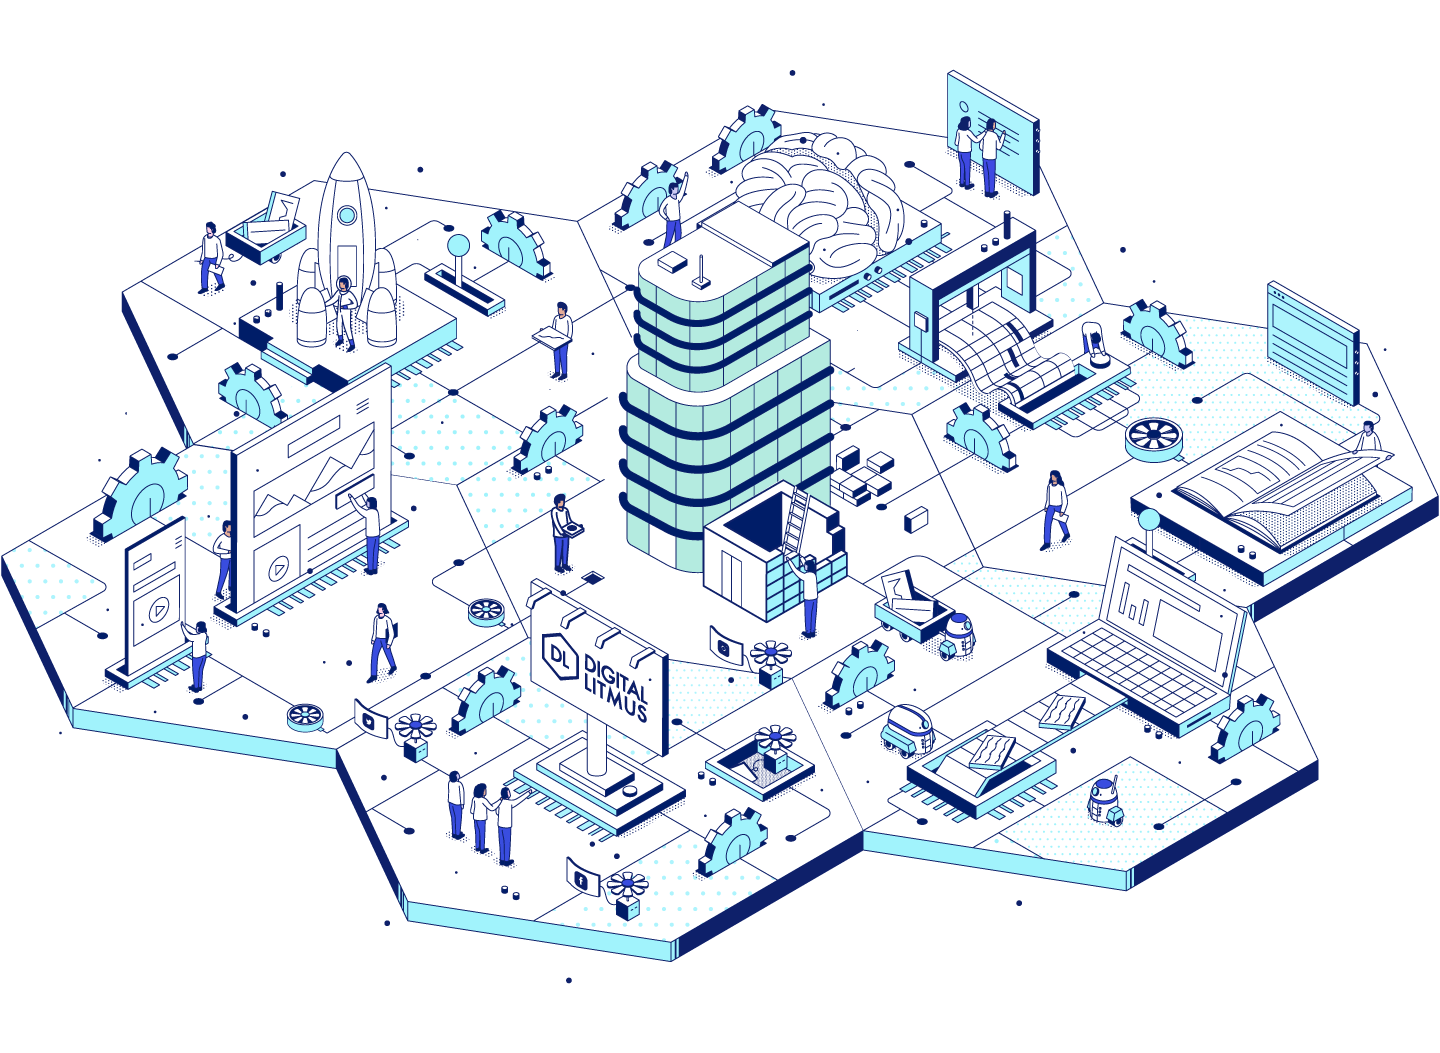 Illustration of business features on a floor of hexagons